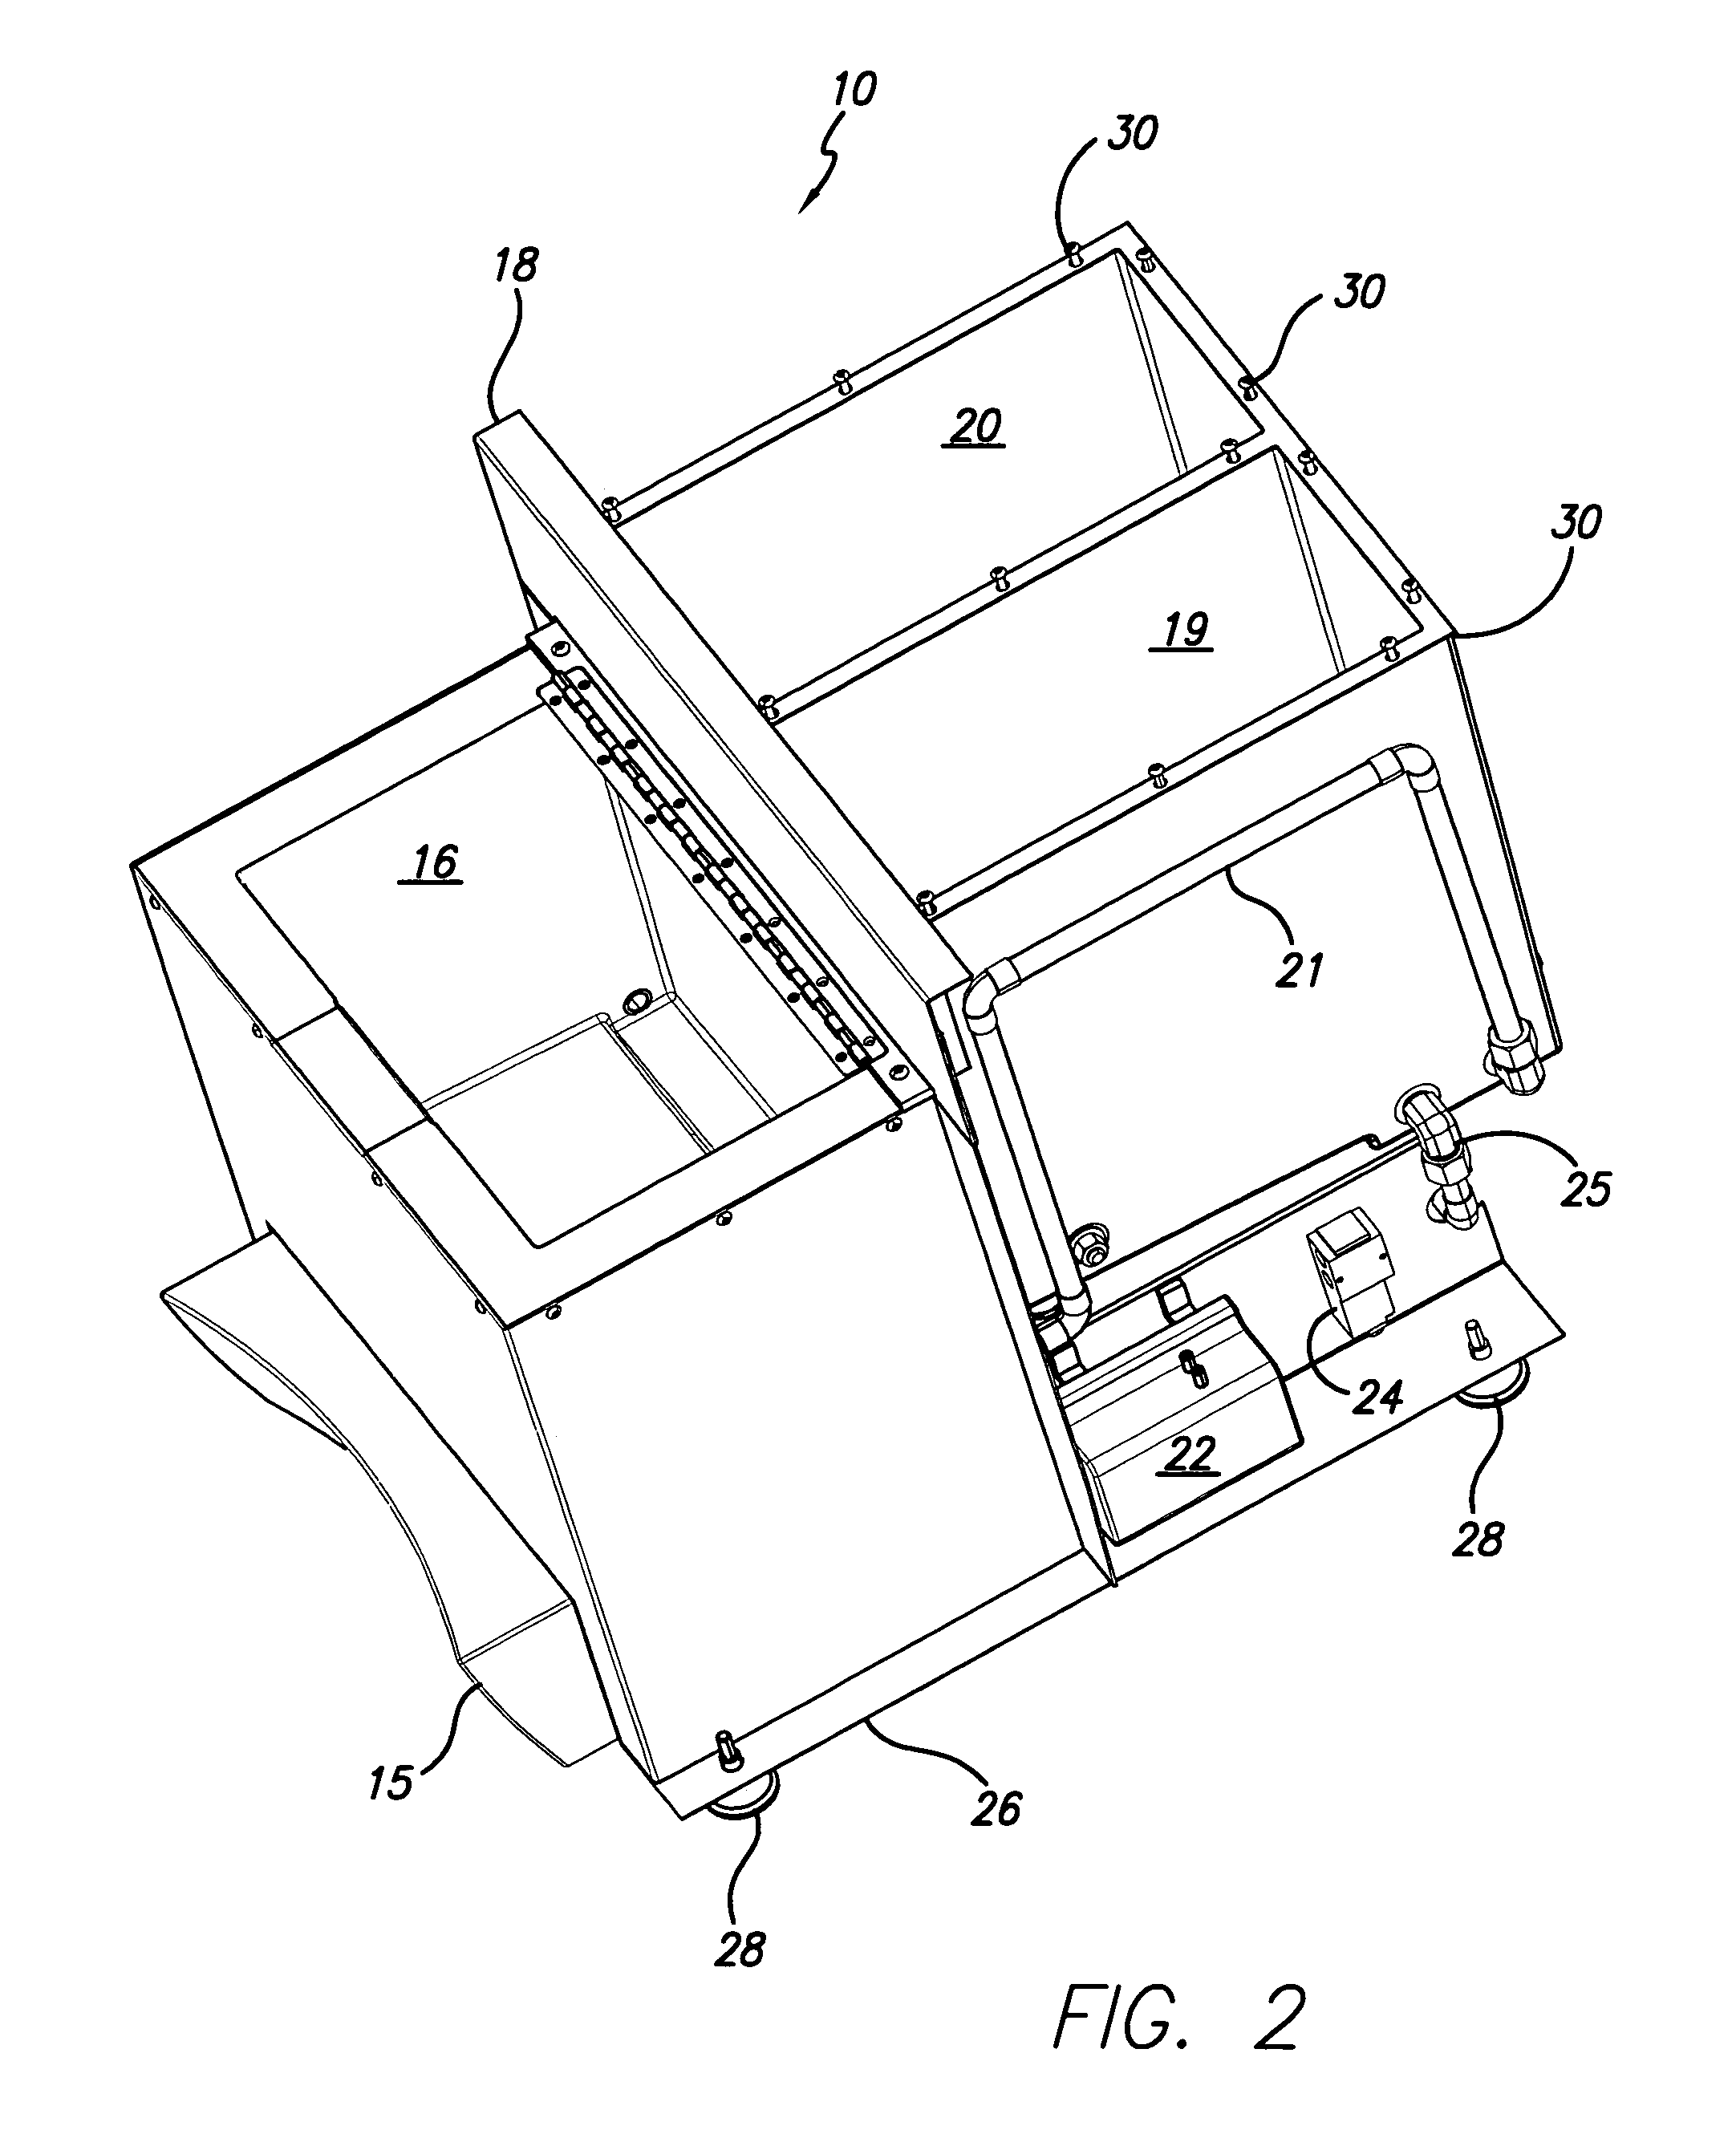 Post processor for three-dimensional objects